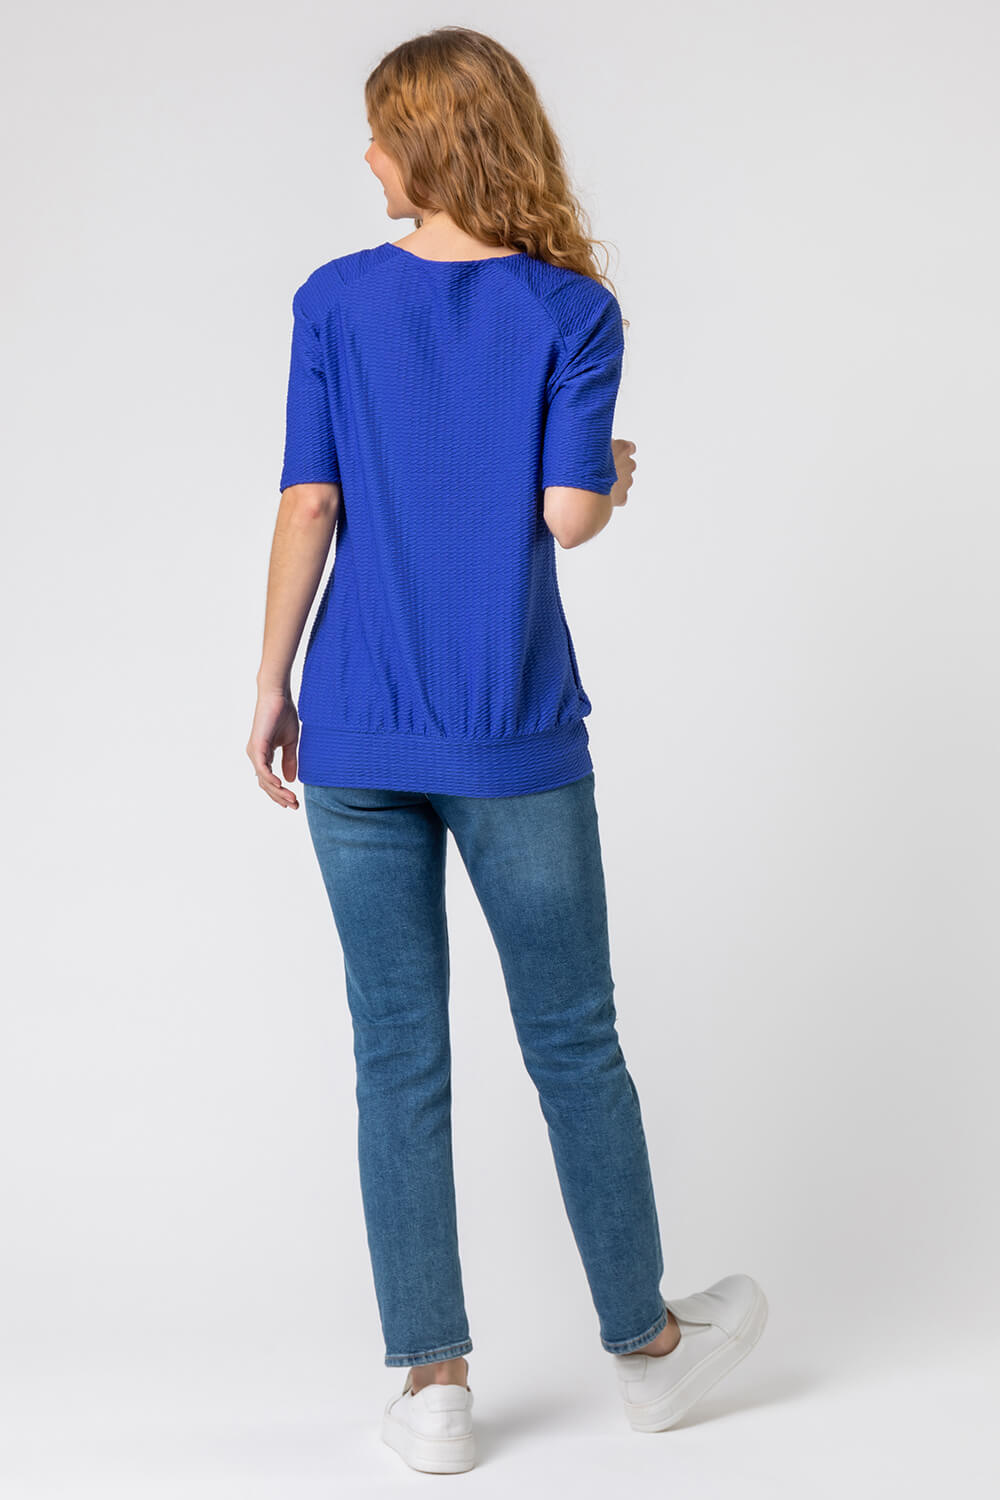 Royal Blue Keyhole Neck Textured Top, Image 2 of 4